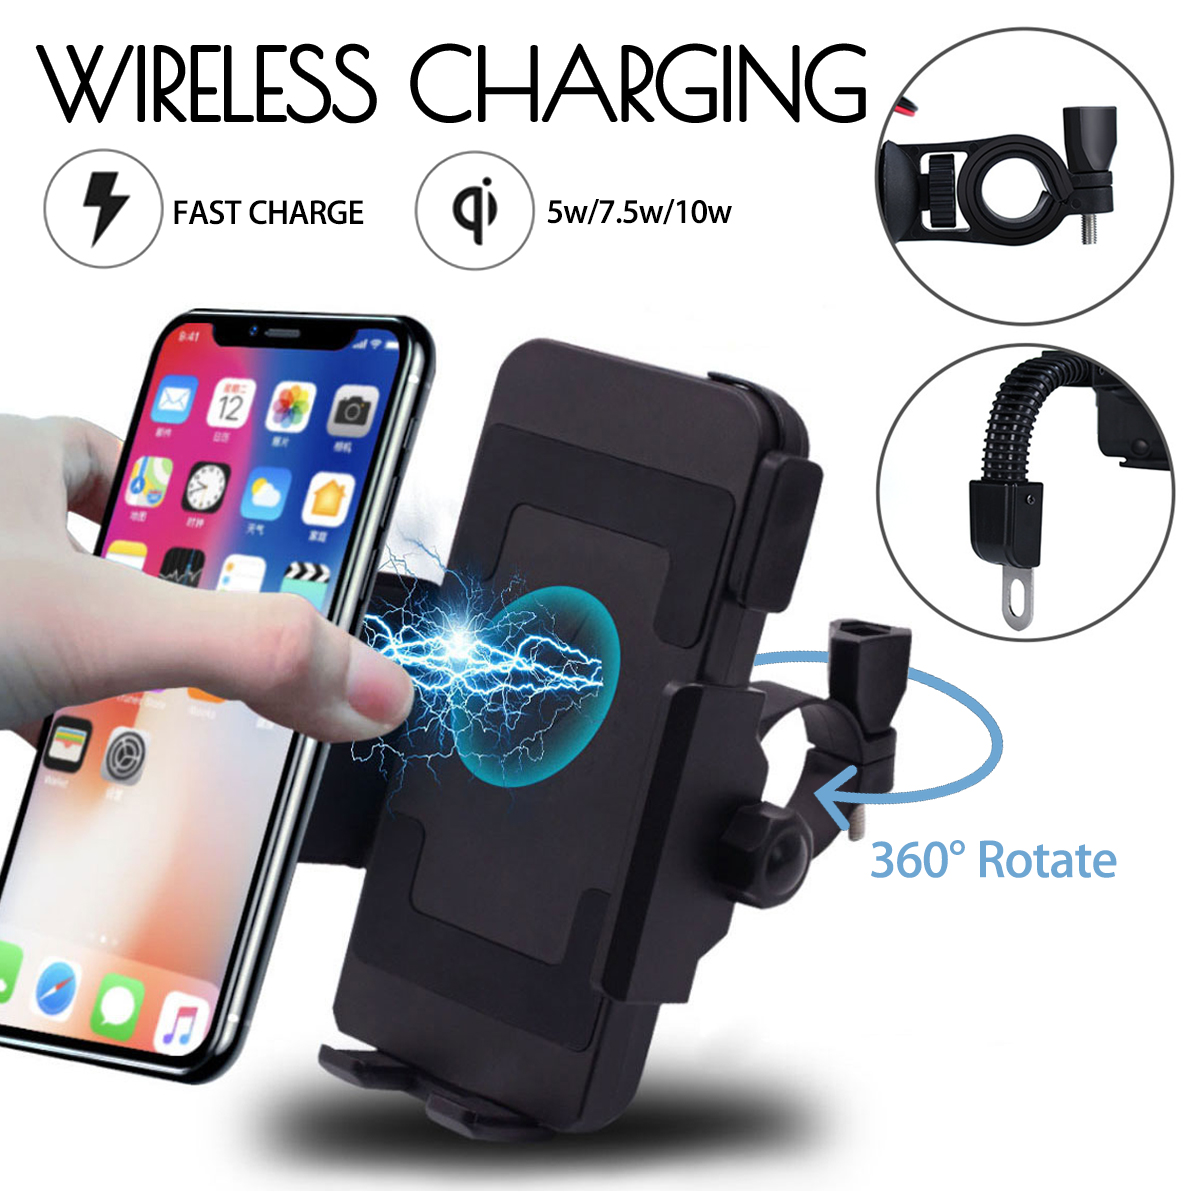 Motorbike-10W-Qi-Wireless-Charger-Fast-Charging-Motorcycle-Phone-Holder-For-45-inch-71-inch-Smart-Ph-1532907-1